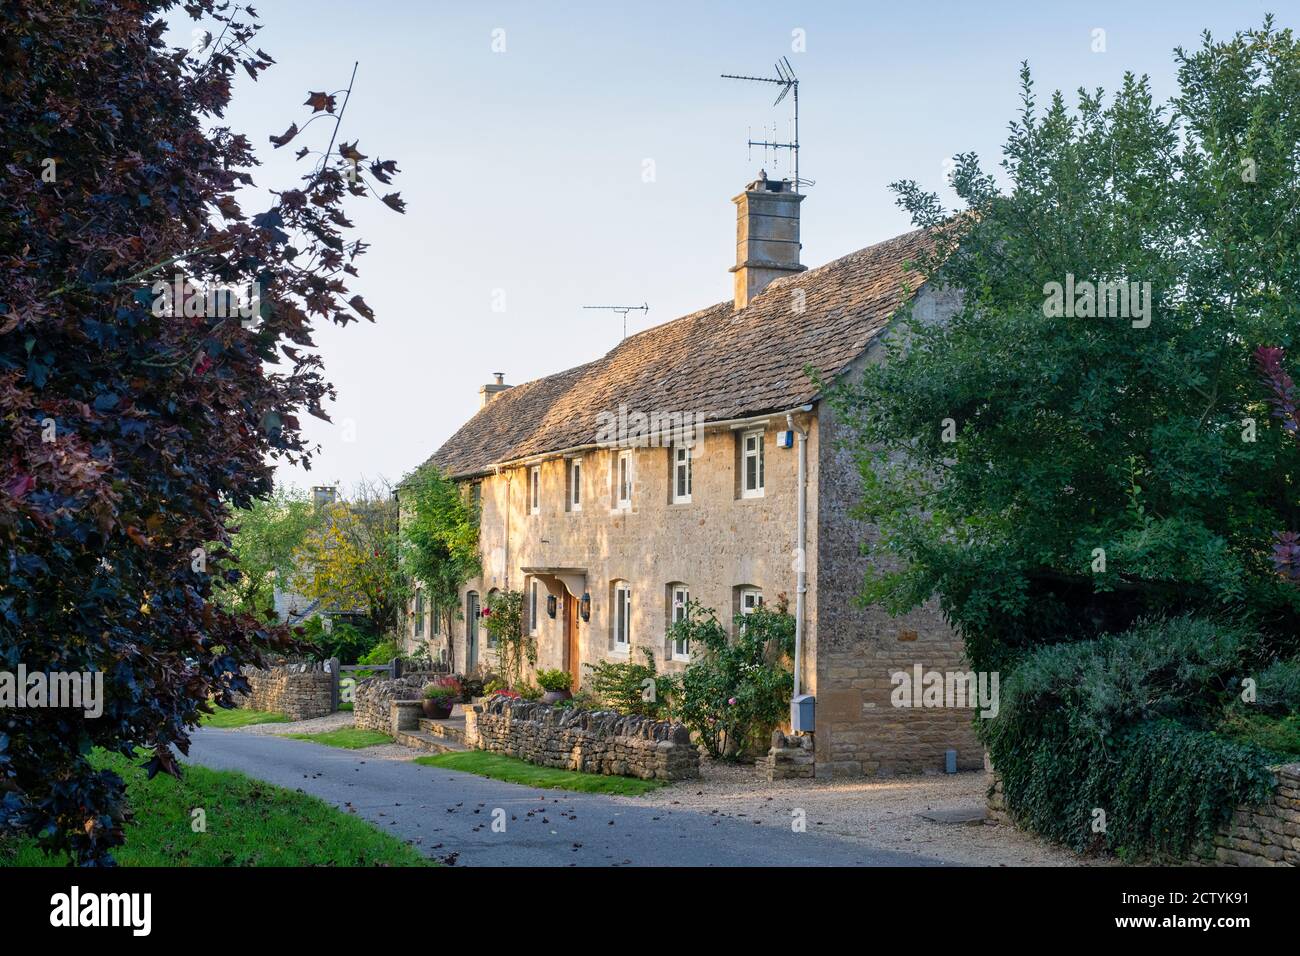 Row of cottages in a cotswold village in early autumn. Taynton, Cotswolds, Oxfordshire, England Stock Photo